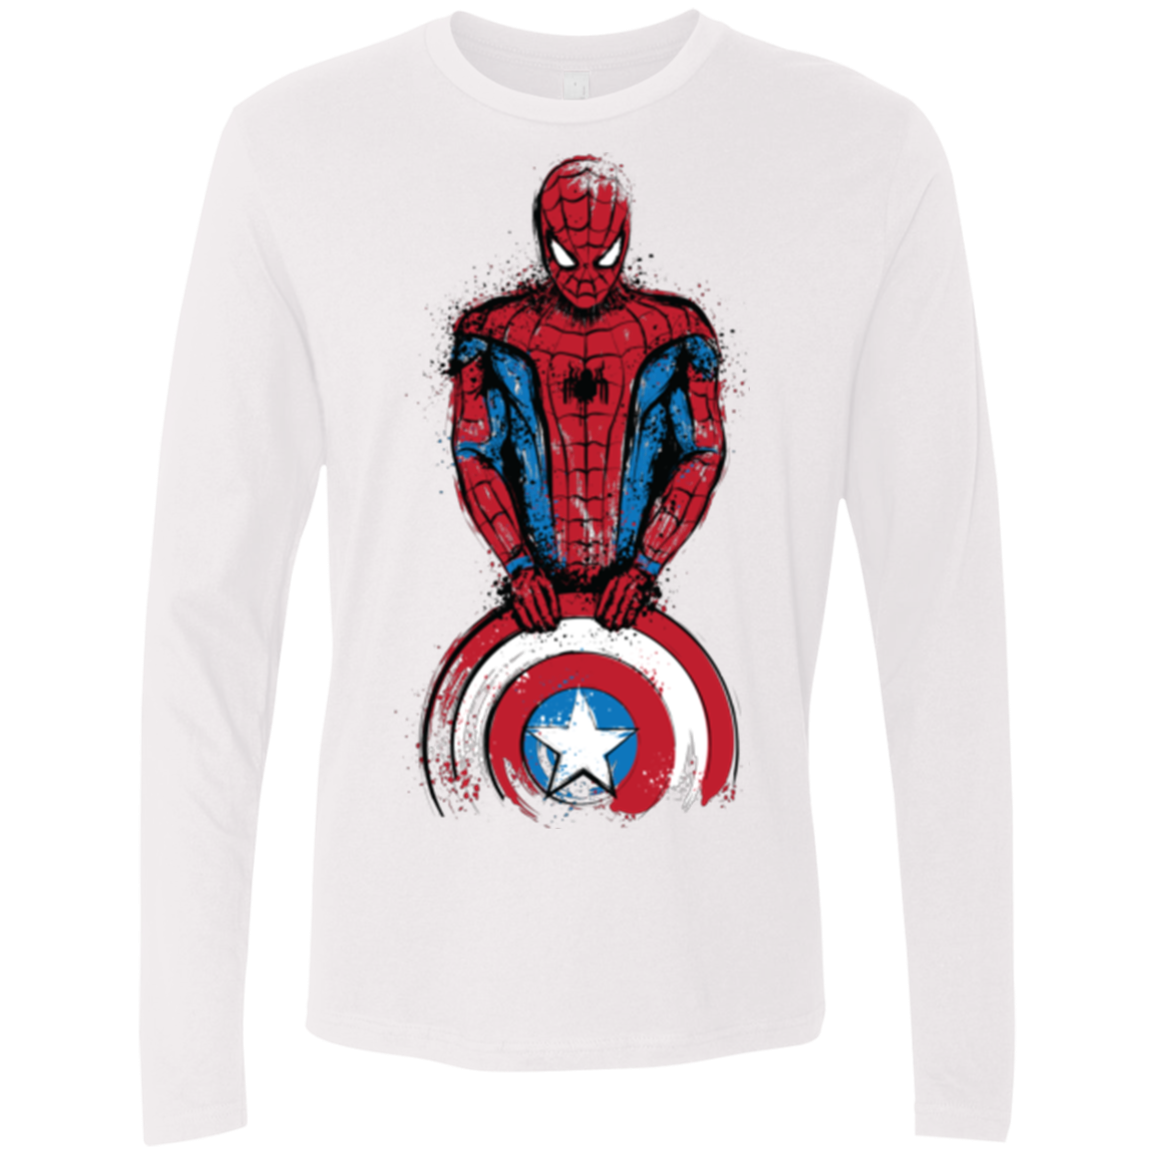 The Spider is Coming Men's Premium Long Sleeve